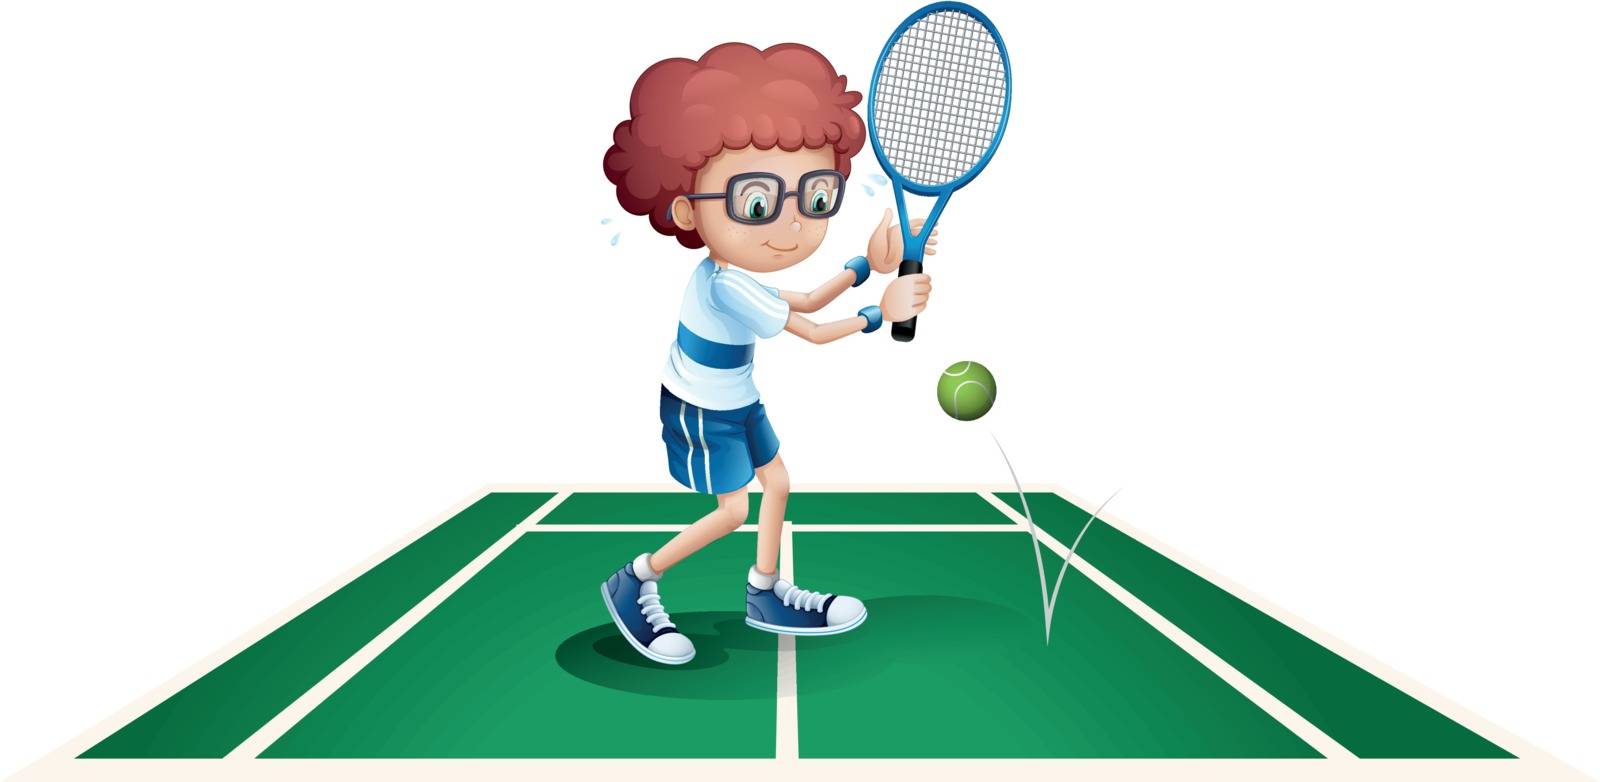 Illustration of an athletic boy on a white background